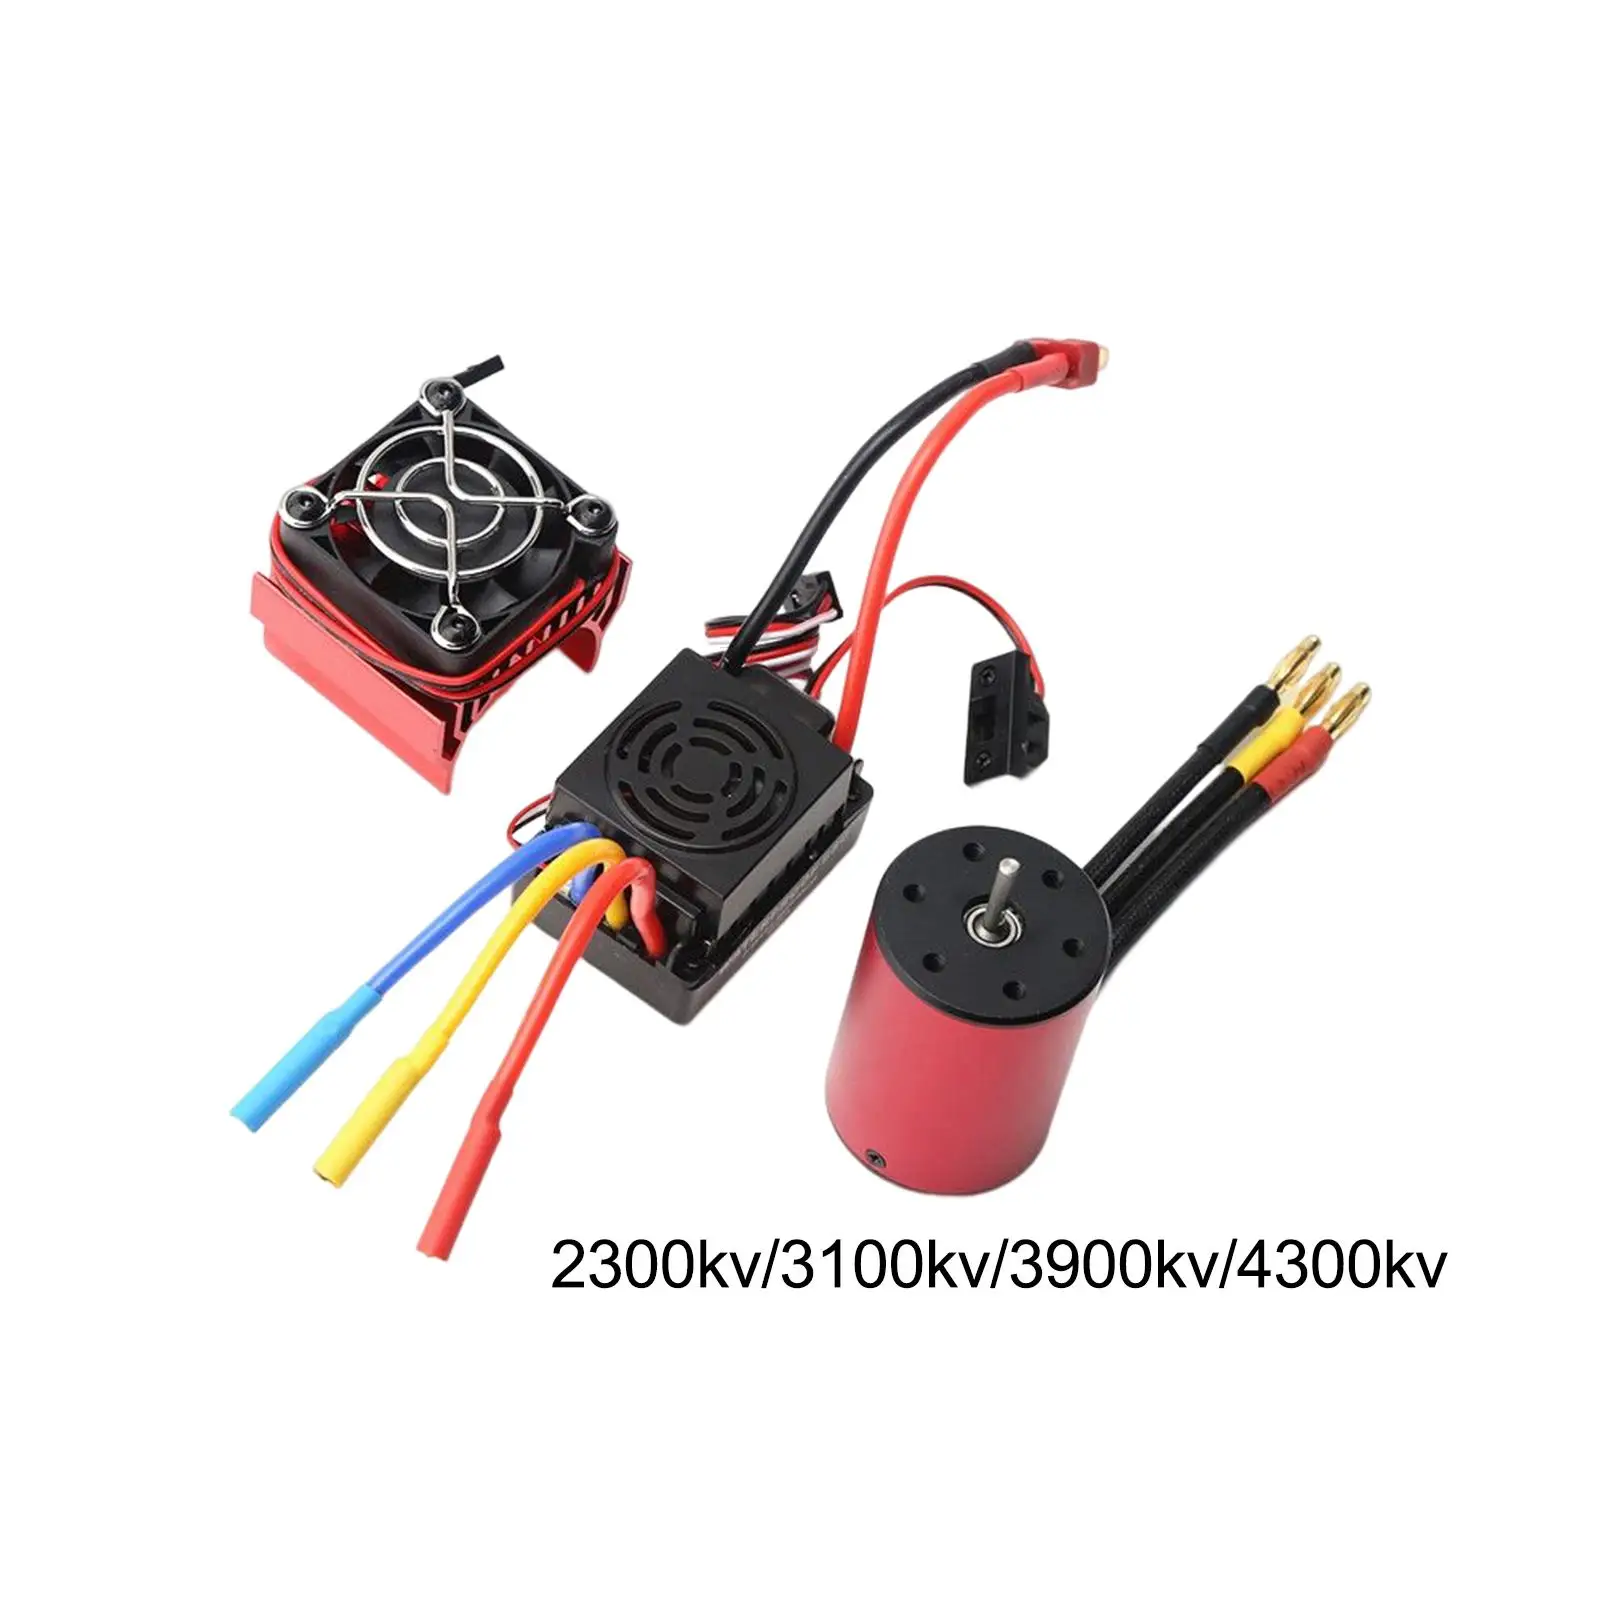 

Brushless Motor with 60A ESC Bulid in 5.8V/3A Bec for 1/10 RC Car Crawler